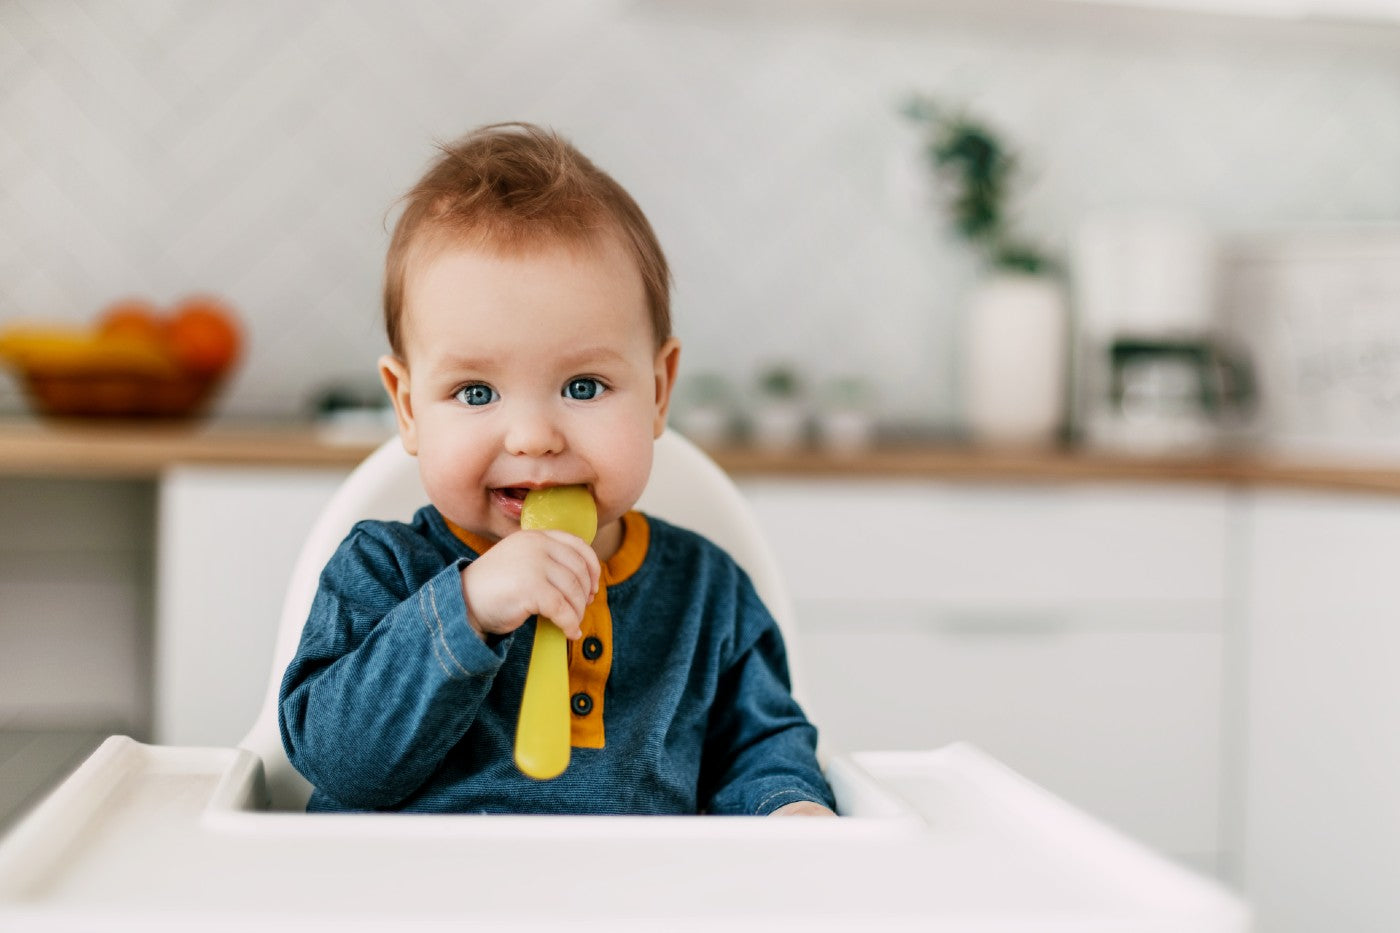 Baby-Led Weaning: How to Teach Baby How to Use Spoon